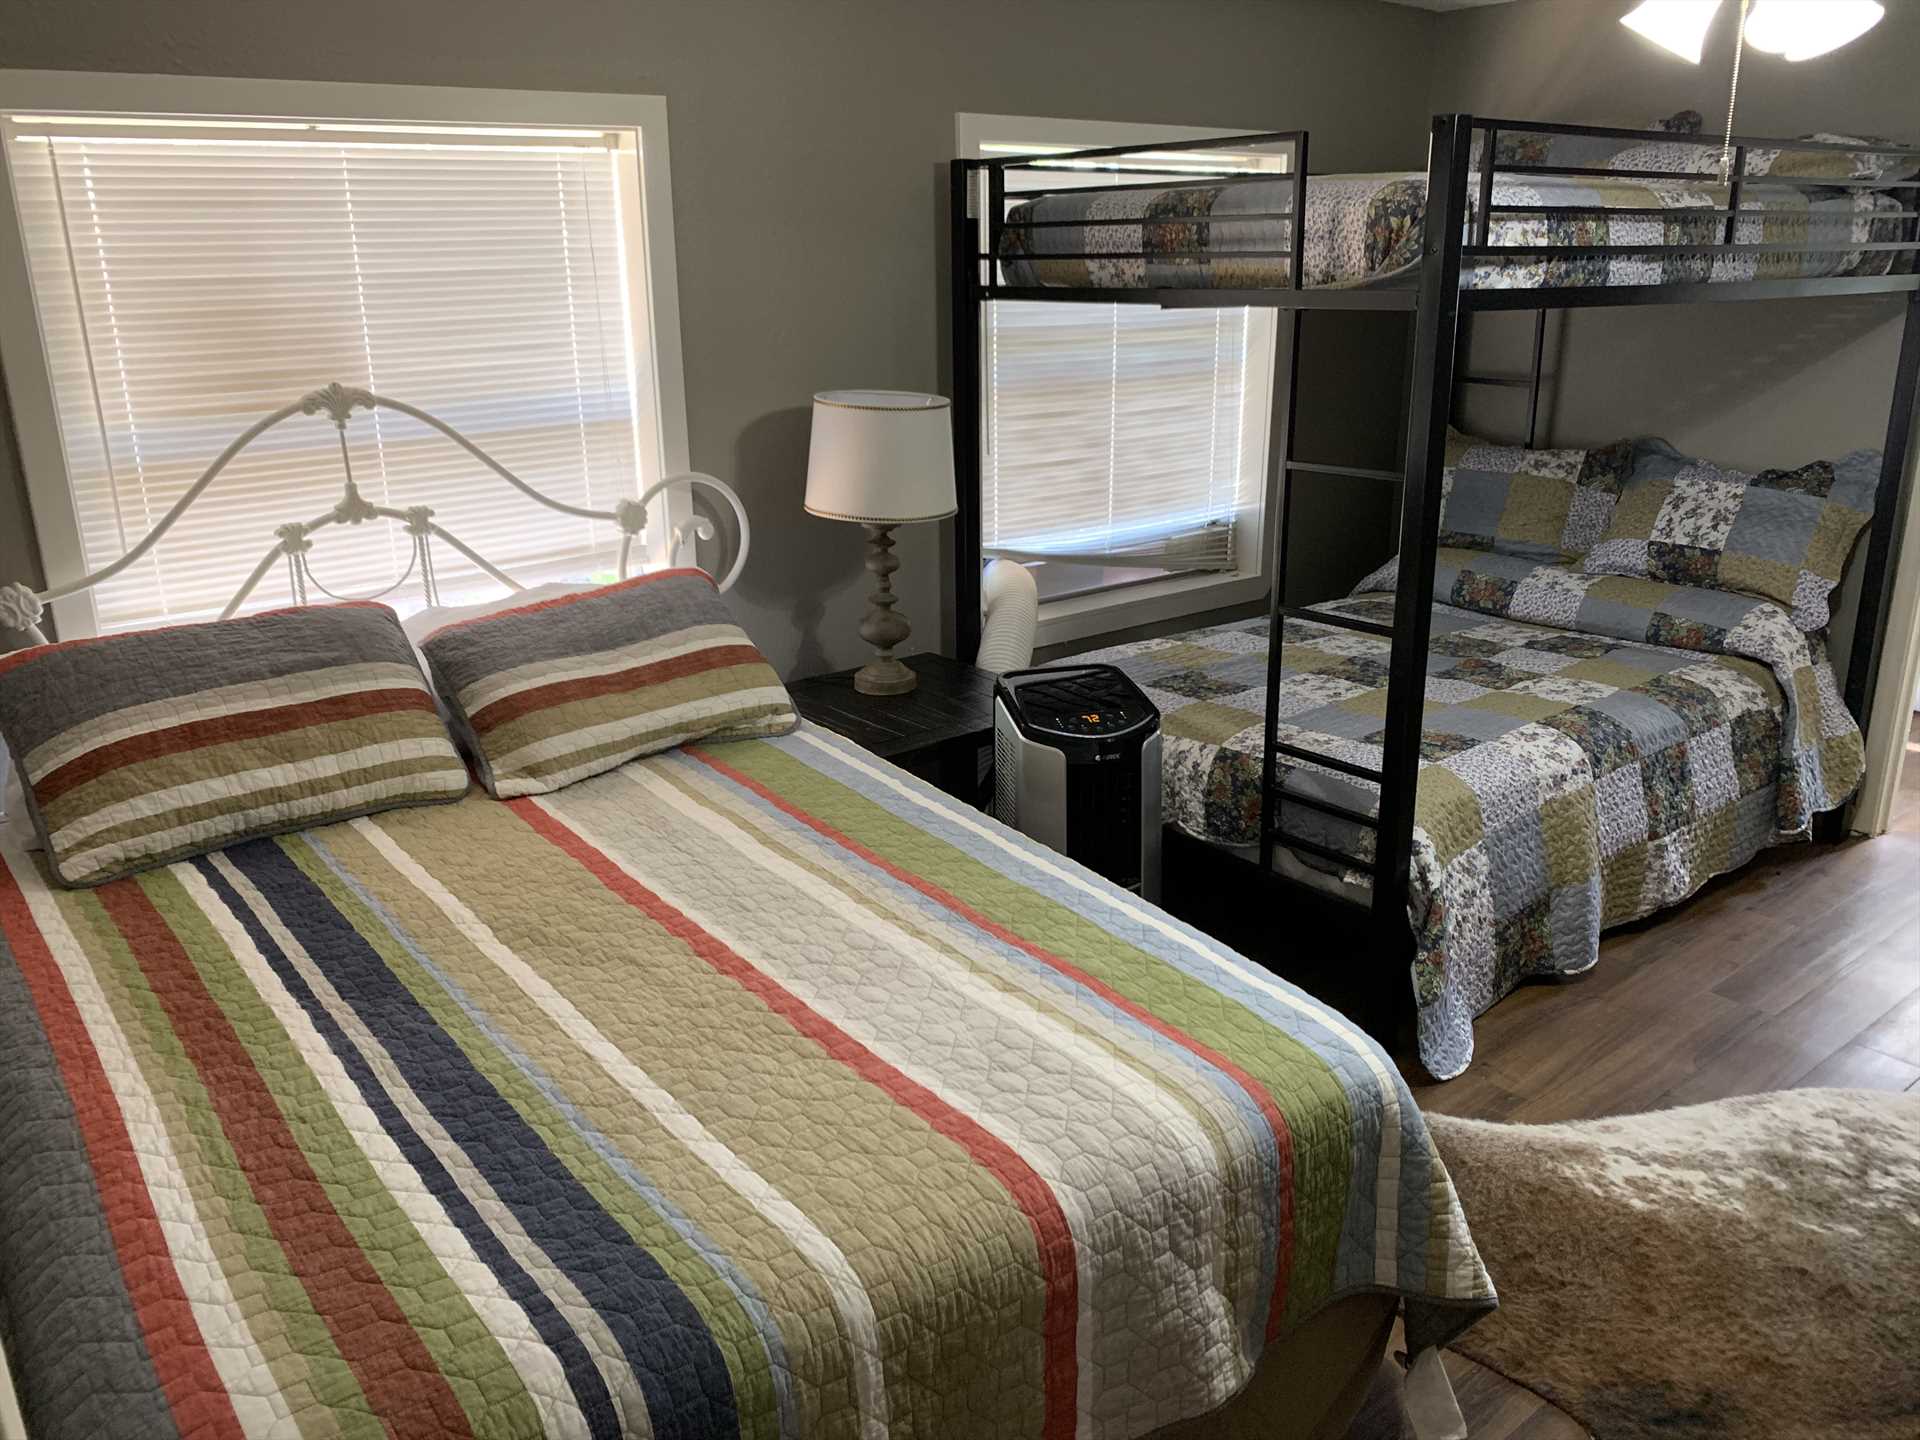                                                 The second bedroom comfortably sleeps up to five with a queen bed, and a bunk-style setup with a double under and a twin up top.